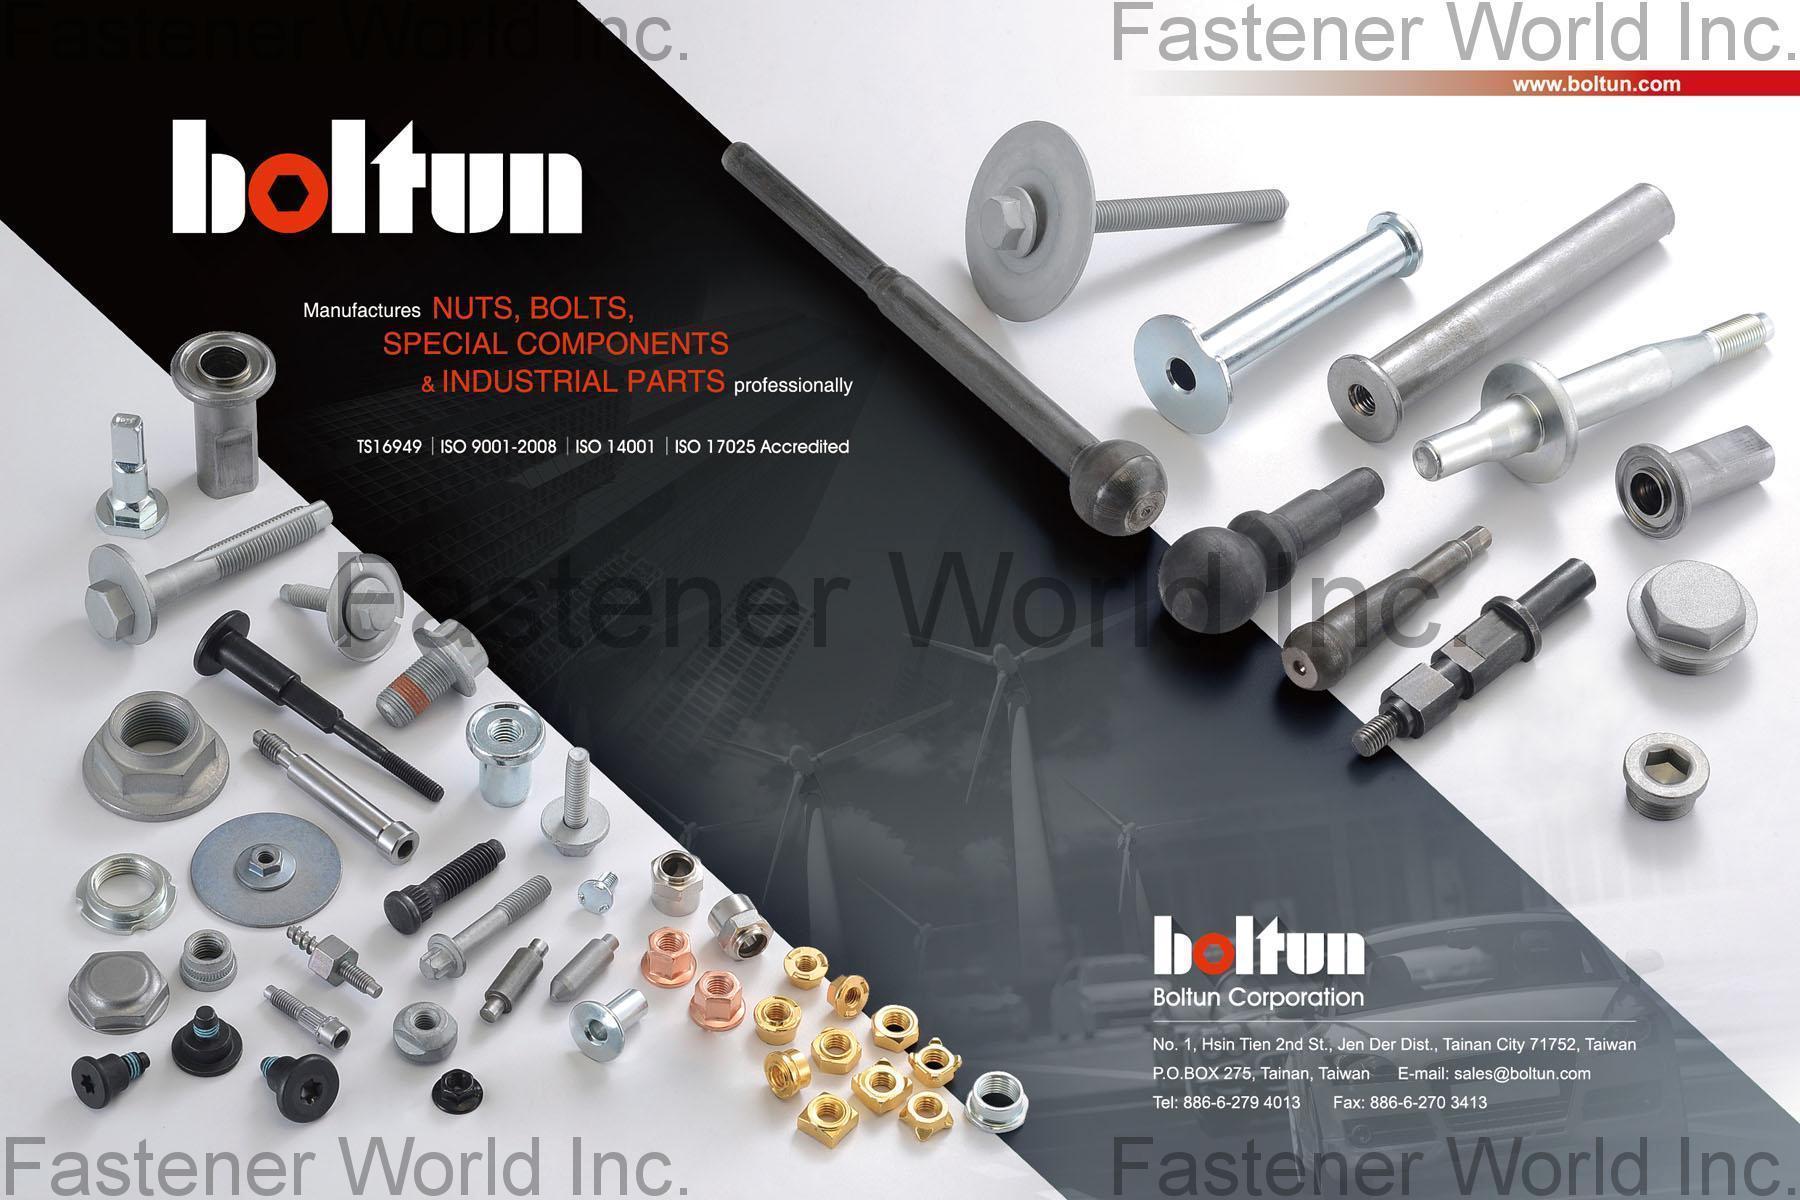 BOLTUN CORPORATION  , Welding Nuts,Rivet Nuts,Clinch Nuts,Locking Nuts,Nylon Insert Nuts,Conical Washer Nuts,T-Nuts,CNC Machining Parts,Stamping Parts,Bushed & Sleeves,Assembly Components,Special Parts,HEX. Bolt & Screw,Flange Bolt,Socket,Sems,Screw With Welding Projection,Screw With Welding Ring & Points,Clinch Bolt,T C Bolt,Special Pin,Wheel Bolt,Rail Bolt,Rail Bolts Construction Fasteners: Nuts, Screws & Washers,Wind Turbine Fasteners Kits: Nuts, Bolts & Washers Truck Wheel Bolts,Bolts & Nuts & Components,Motorcycle parts,Nylon rings & special washer,Expansion Bolt , Pneumatic Components